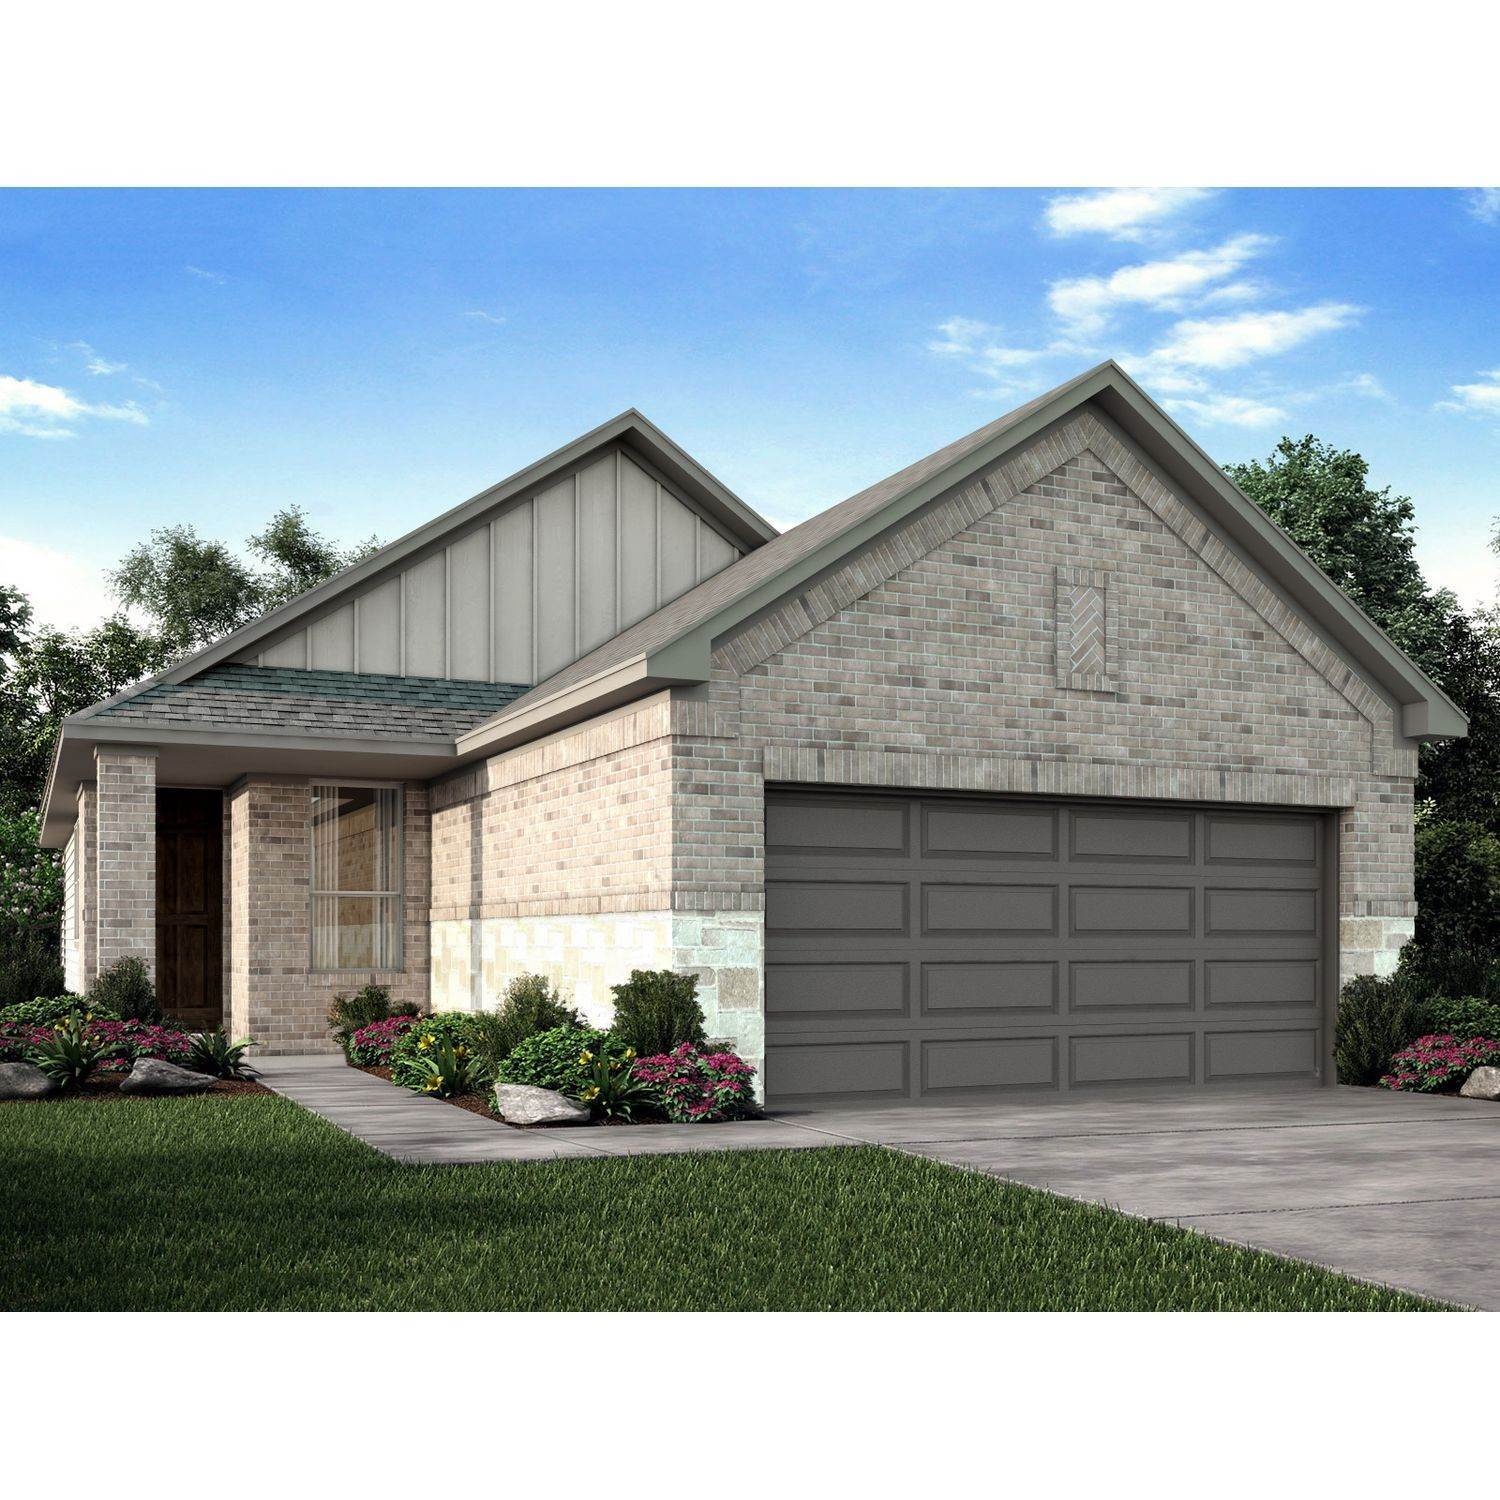 Single Family for Sale at Conroe, TX 77385